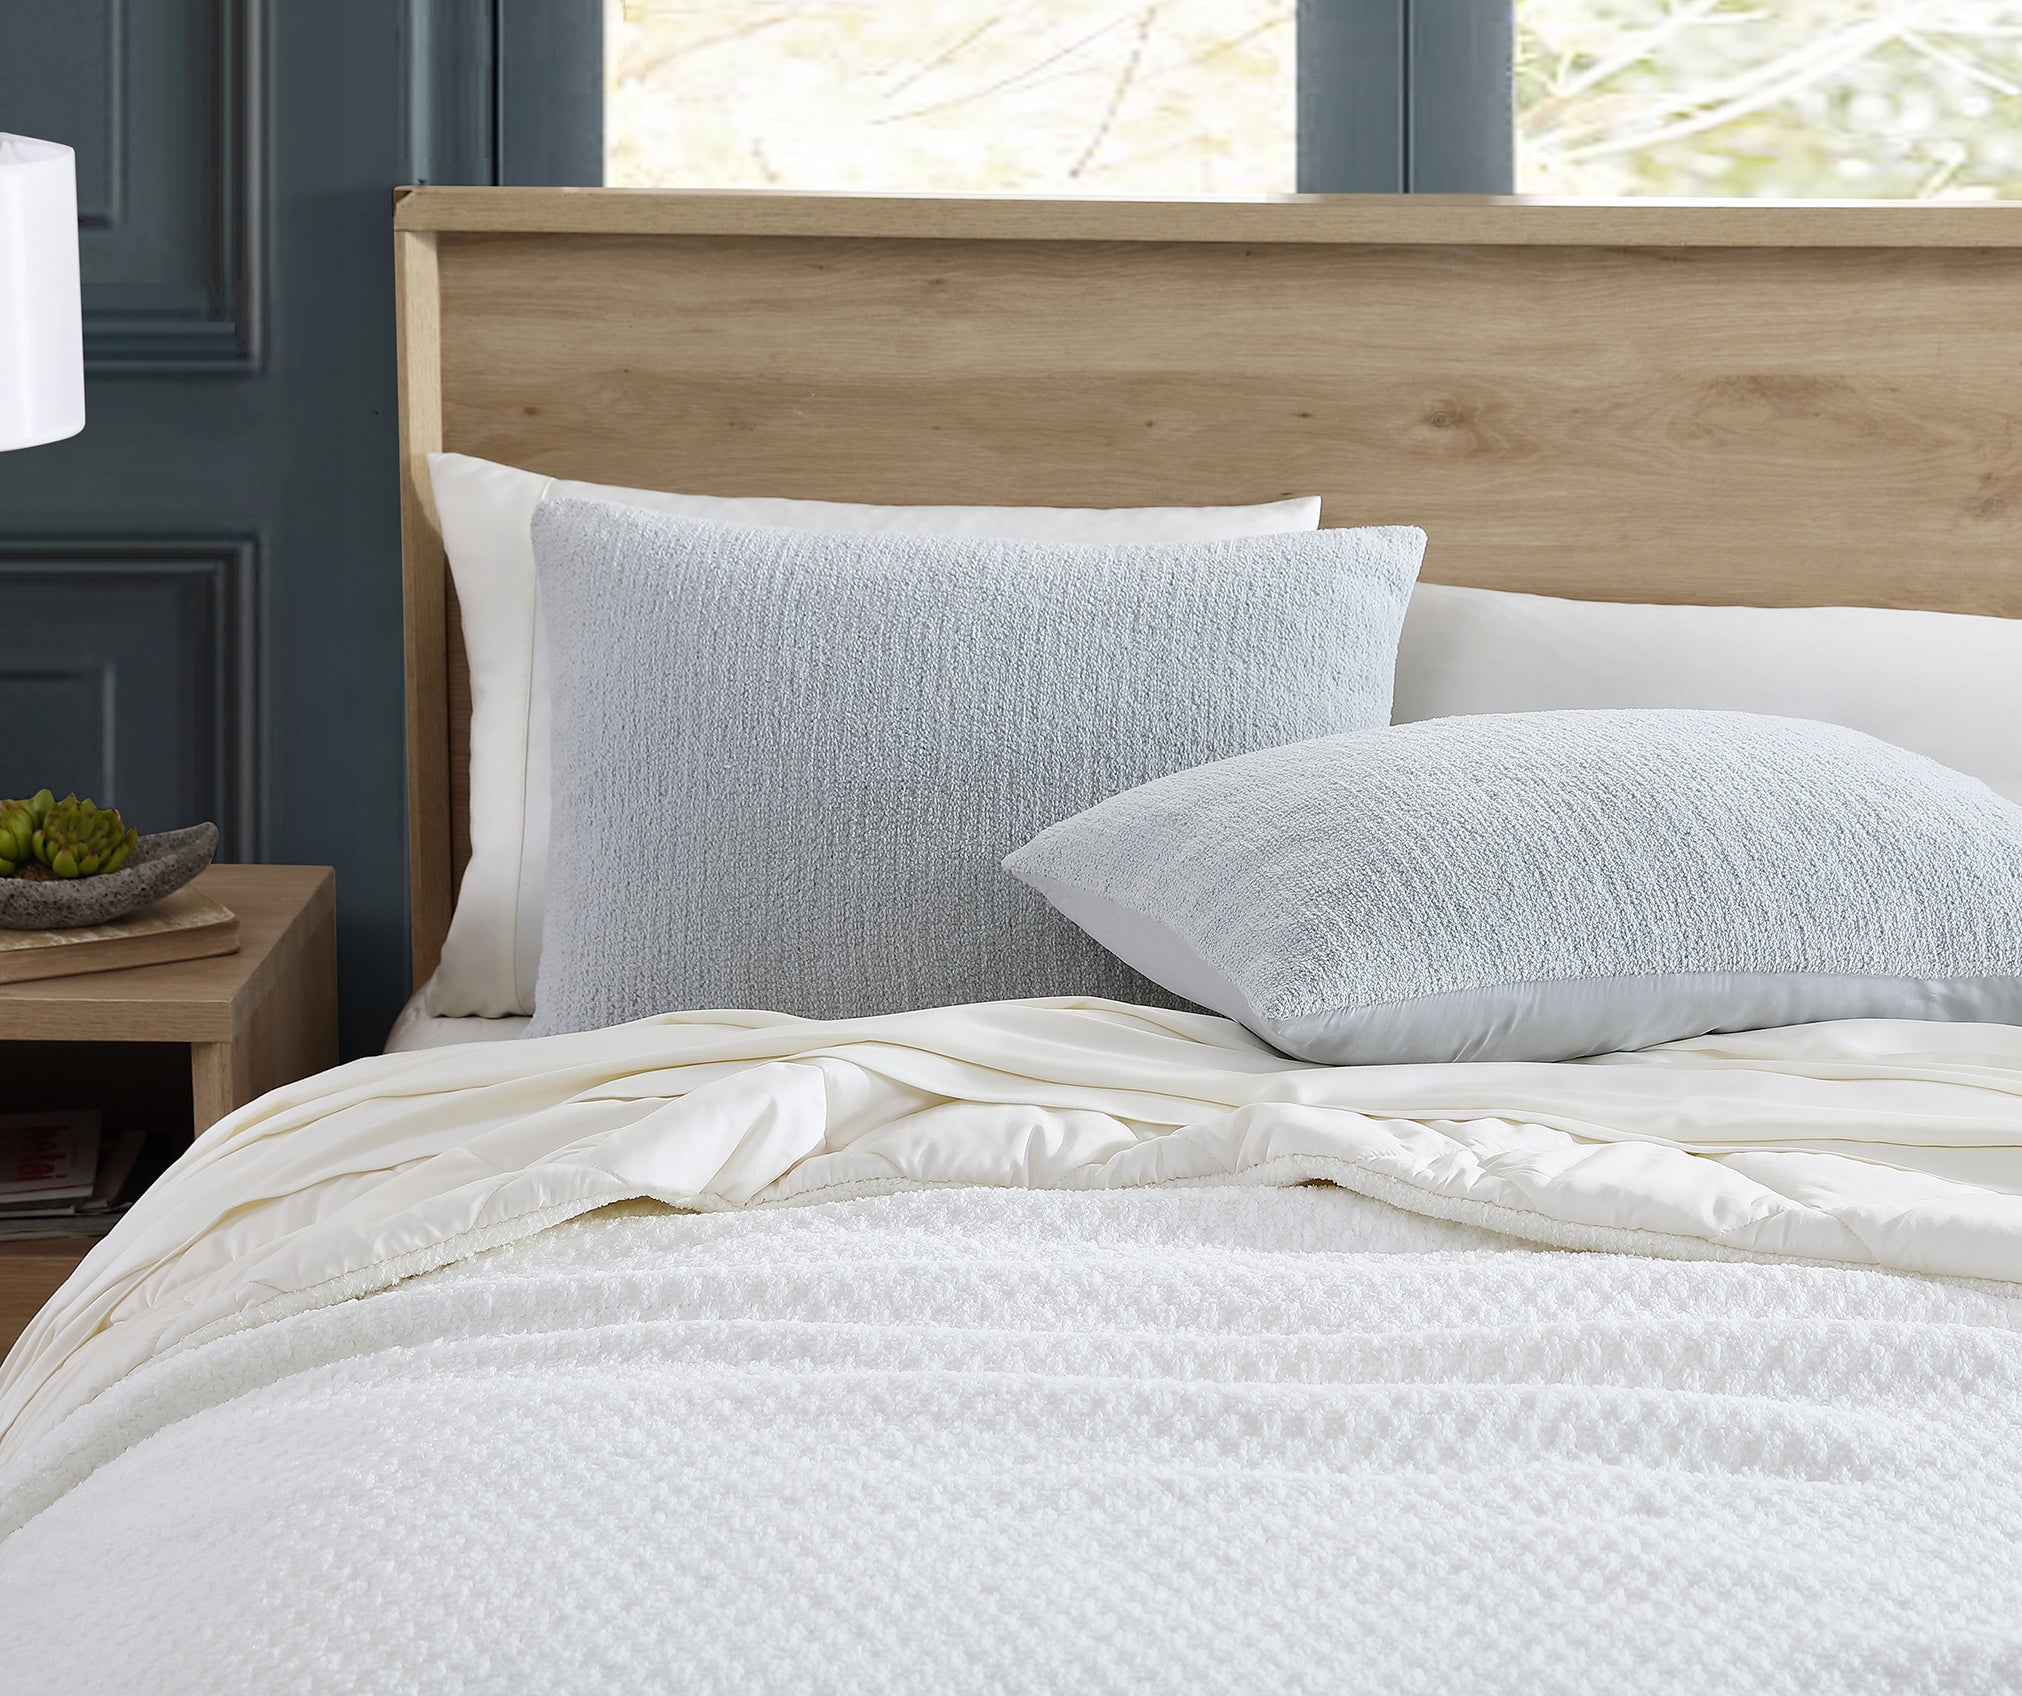 What is a Sham? Sunday Citizen's Snug + Bamboo Sham Set in Cloud Grey. Snug Basketweave Comforter in Clear White. Premium Bamboo Sheet Set in Buttermilk. Four pillows on a simple white bed.